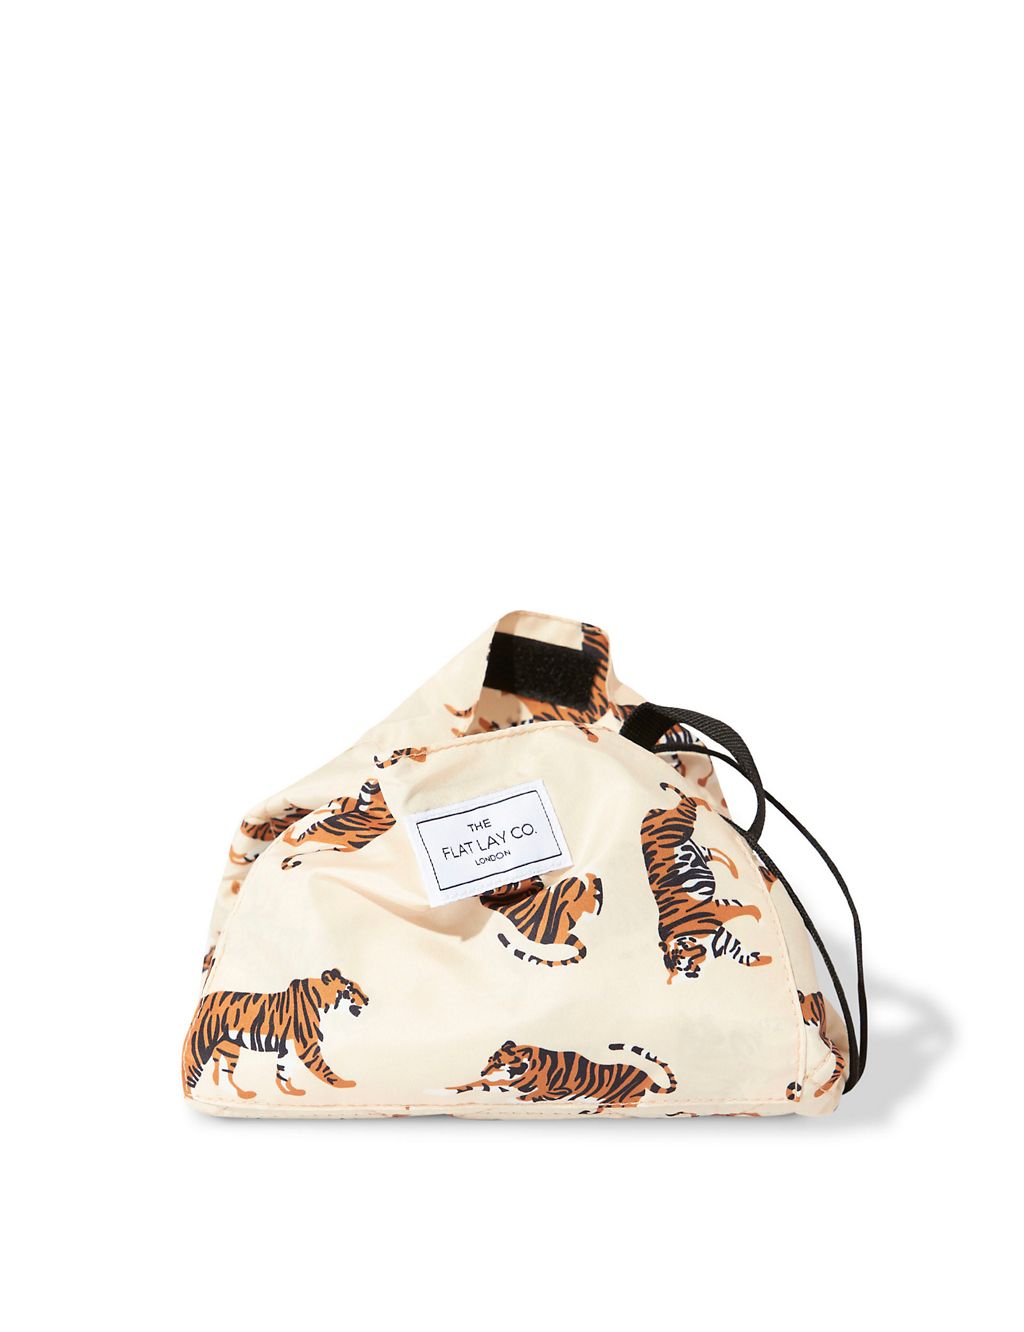 Open Flat Makeup Bag In Neutral Tigers 1 of 3